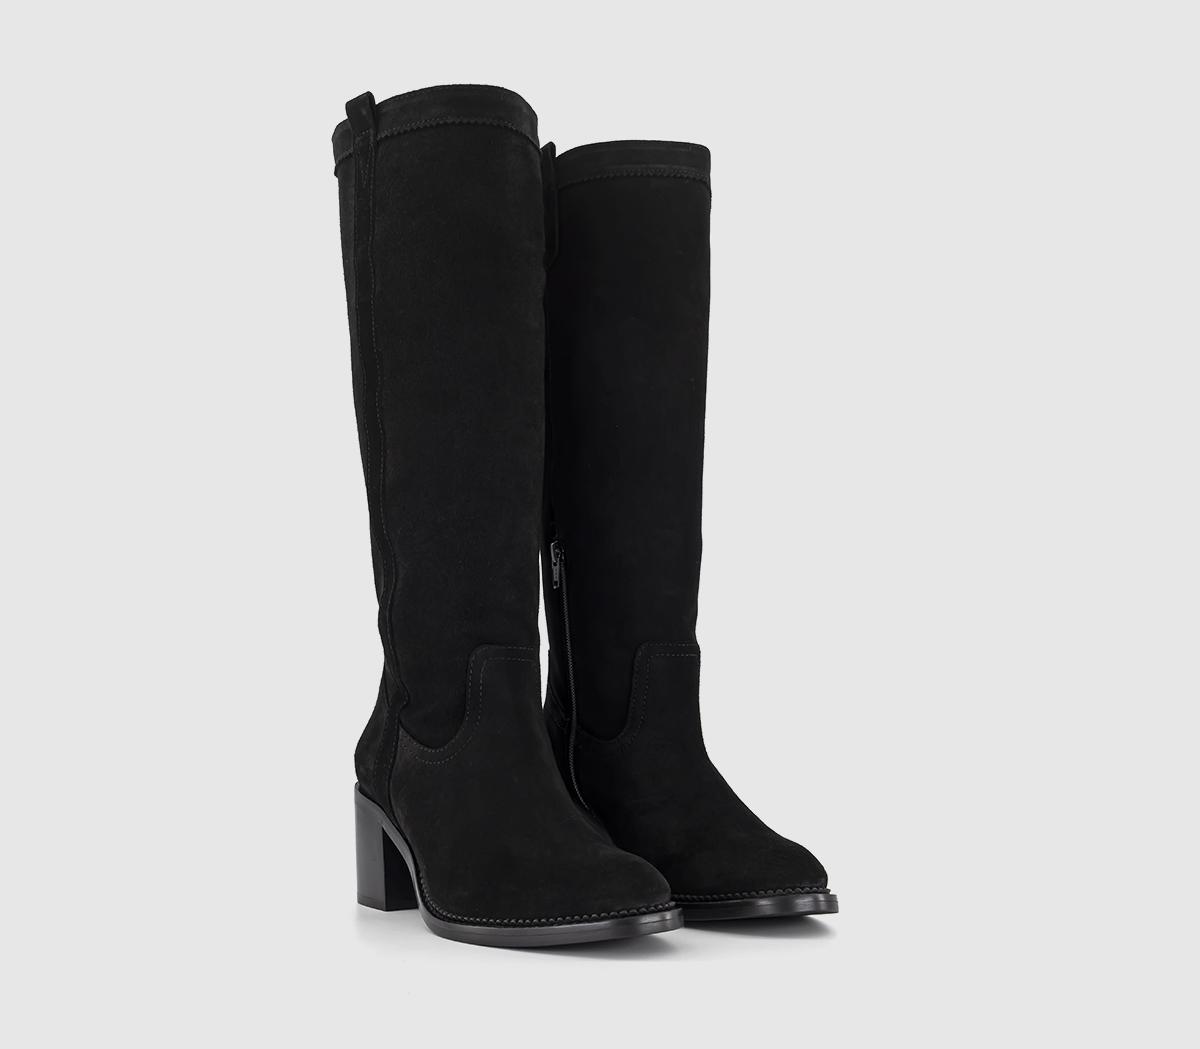 OFFICE Womens Knockout Heeled Knee High Boots Black Suede, 6